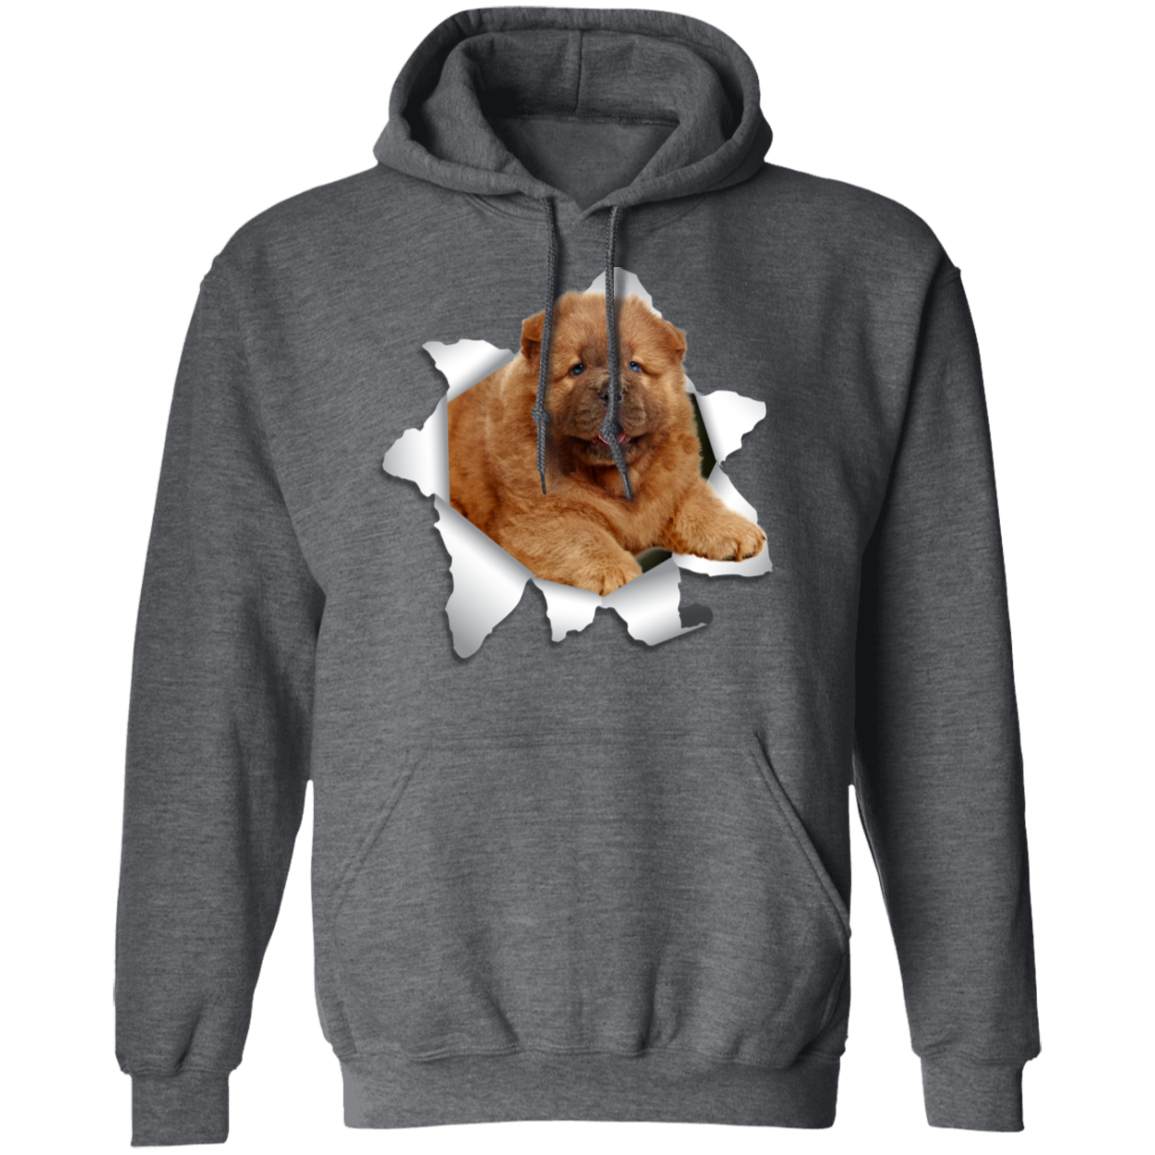 Canine's World Sweatshirts CHOW CHOW 3D Pullover Hoodie 8 oz. Ultimate Shield